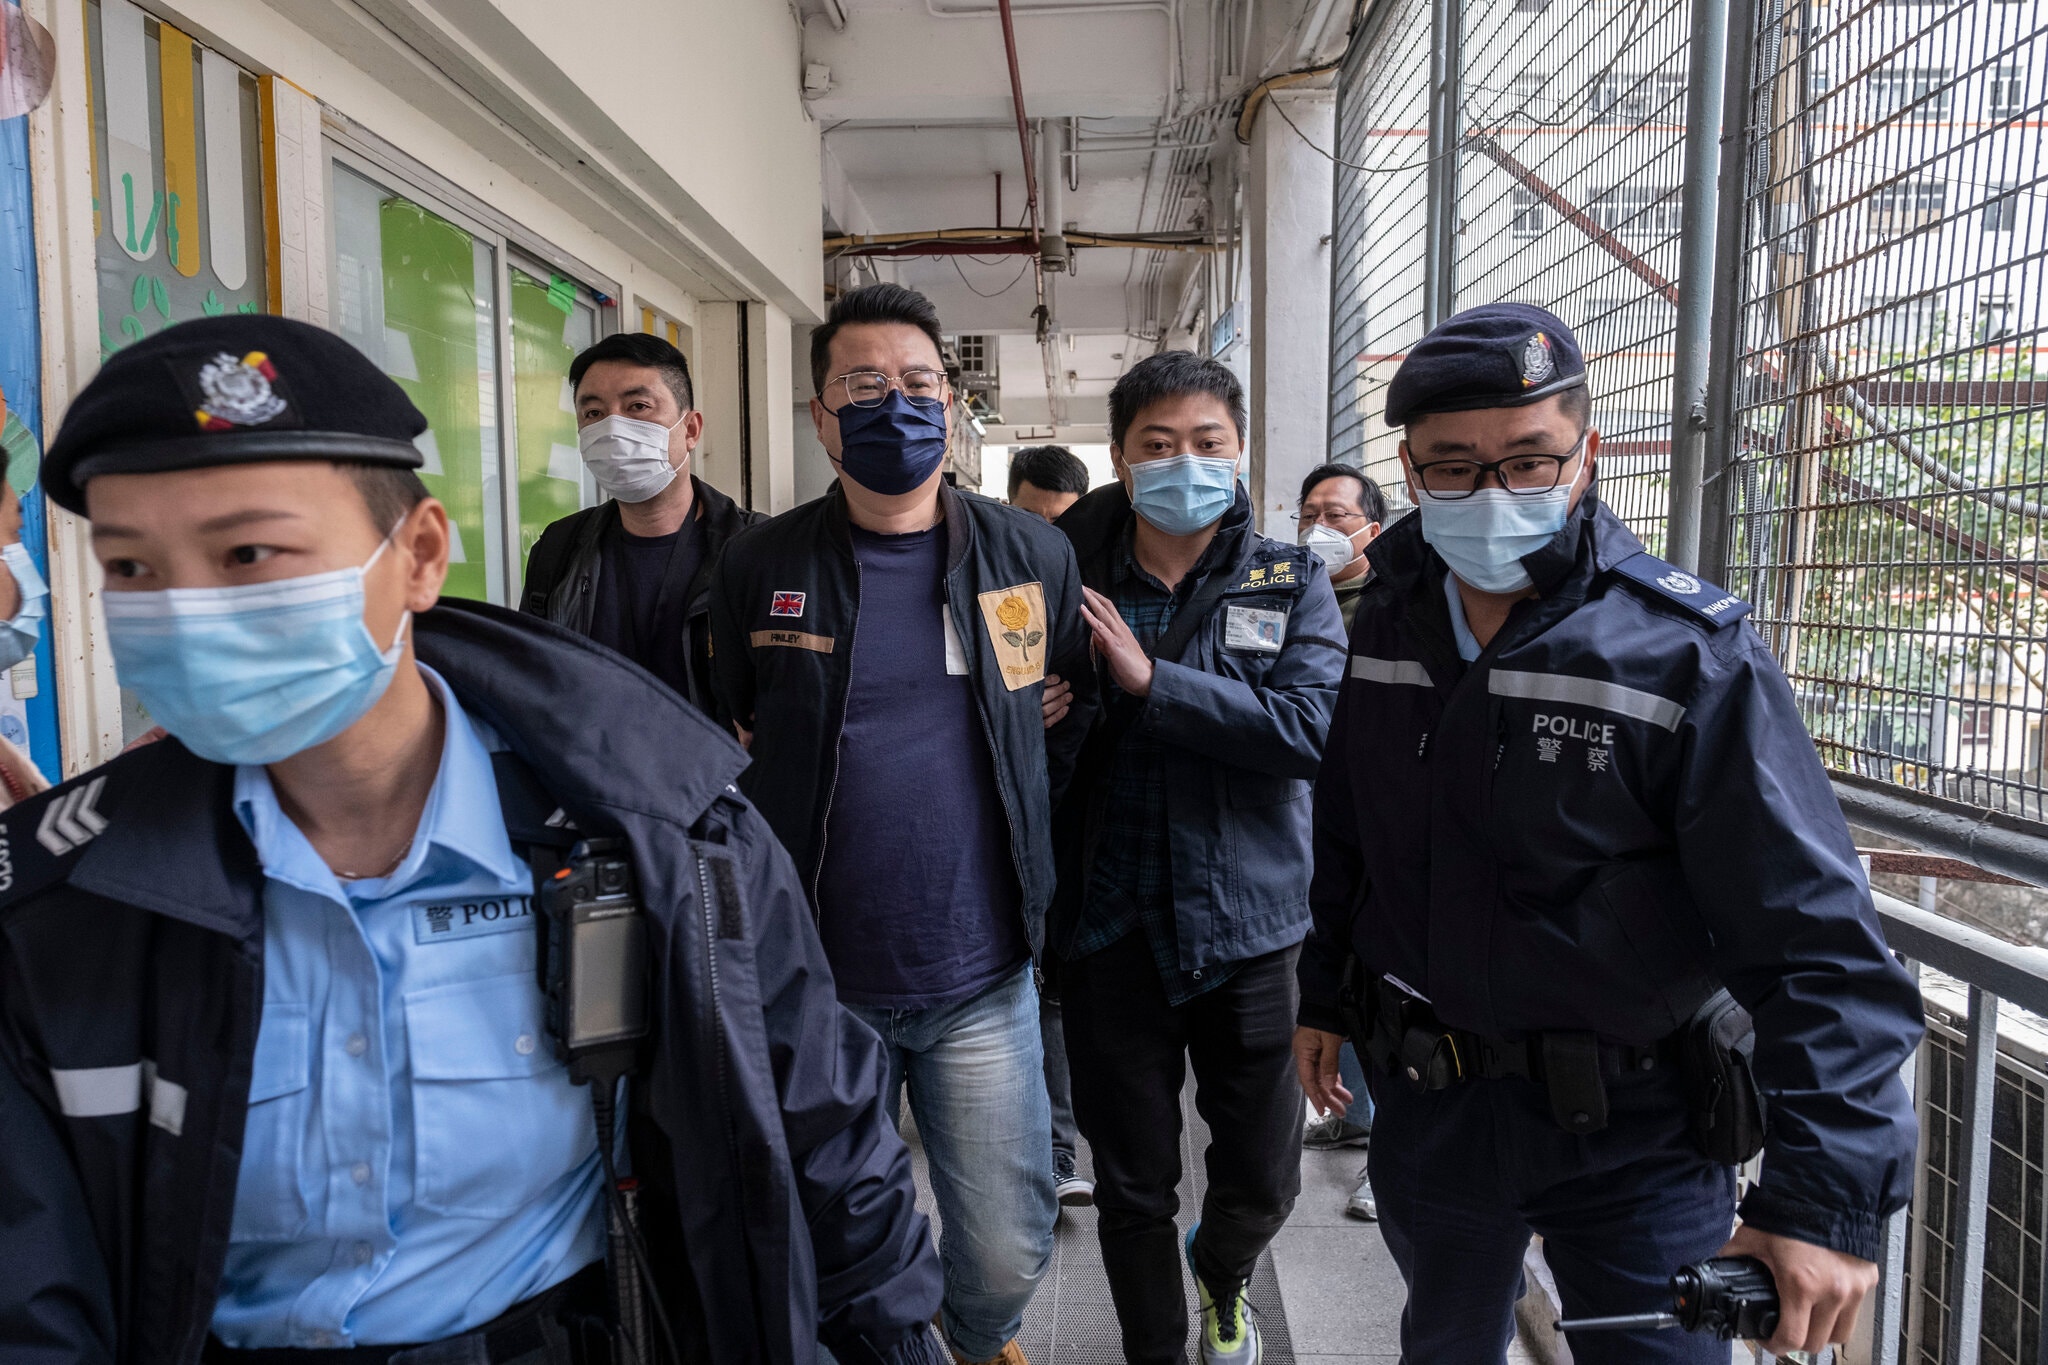 With Mass Arrests, Beijing Exerts an Increasingly Heavy Hand in Hong Kong